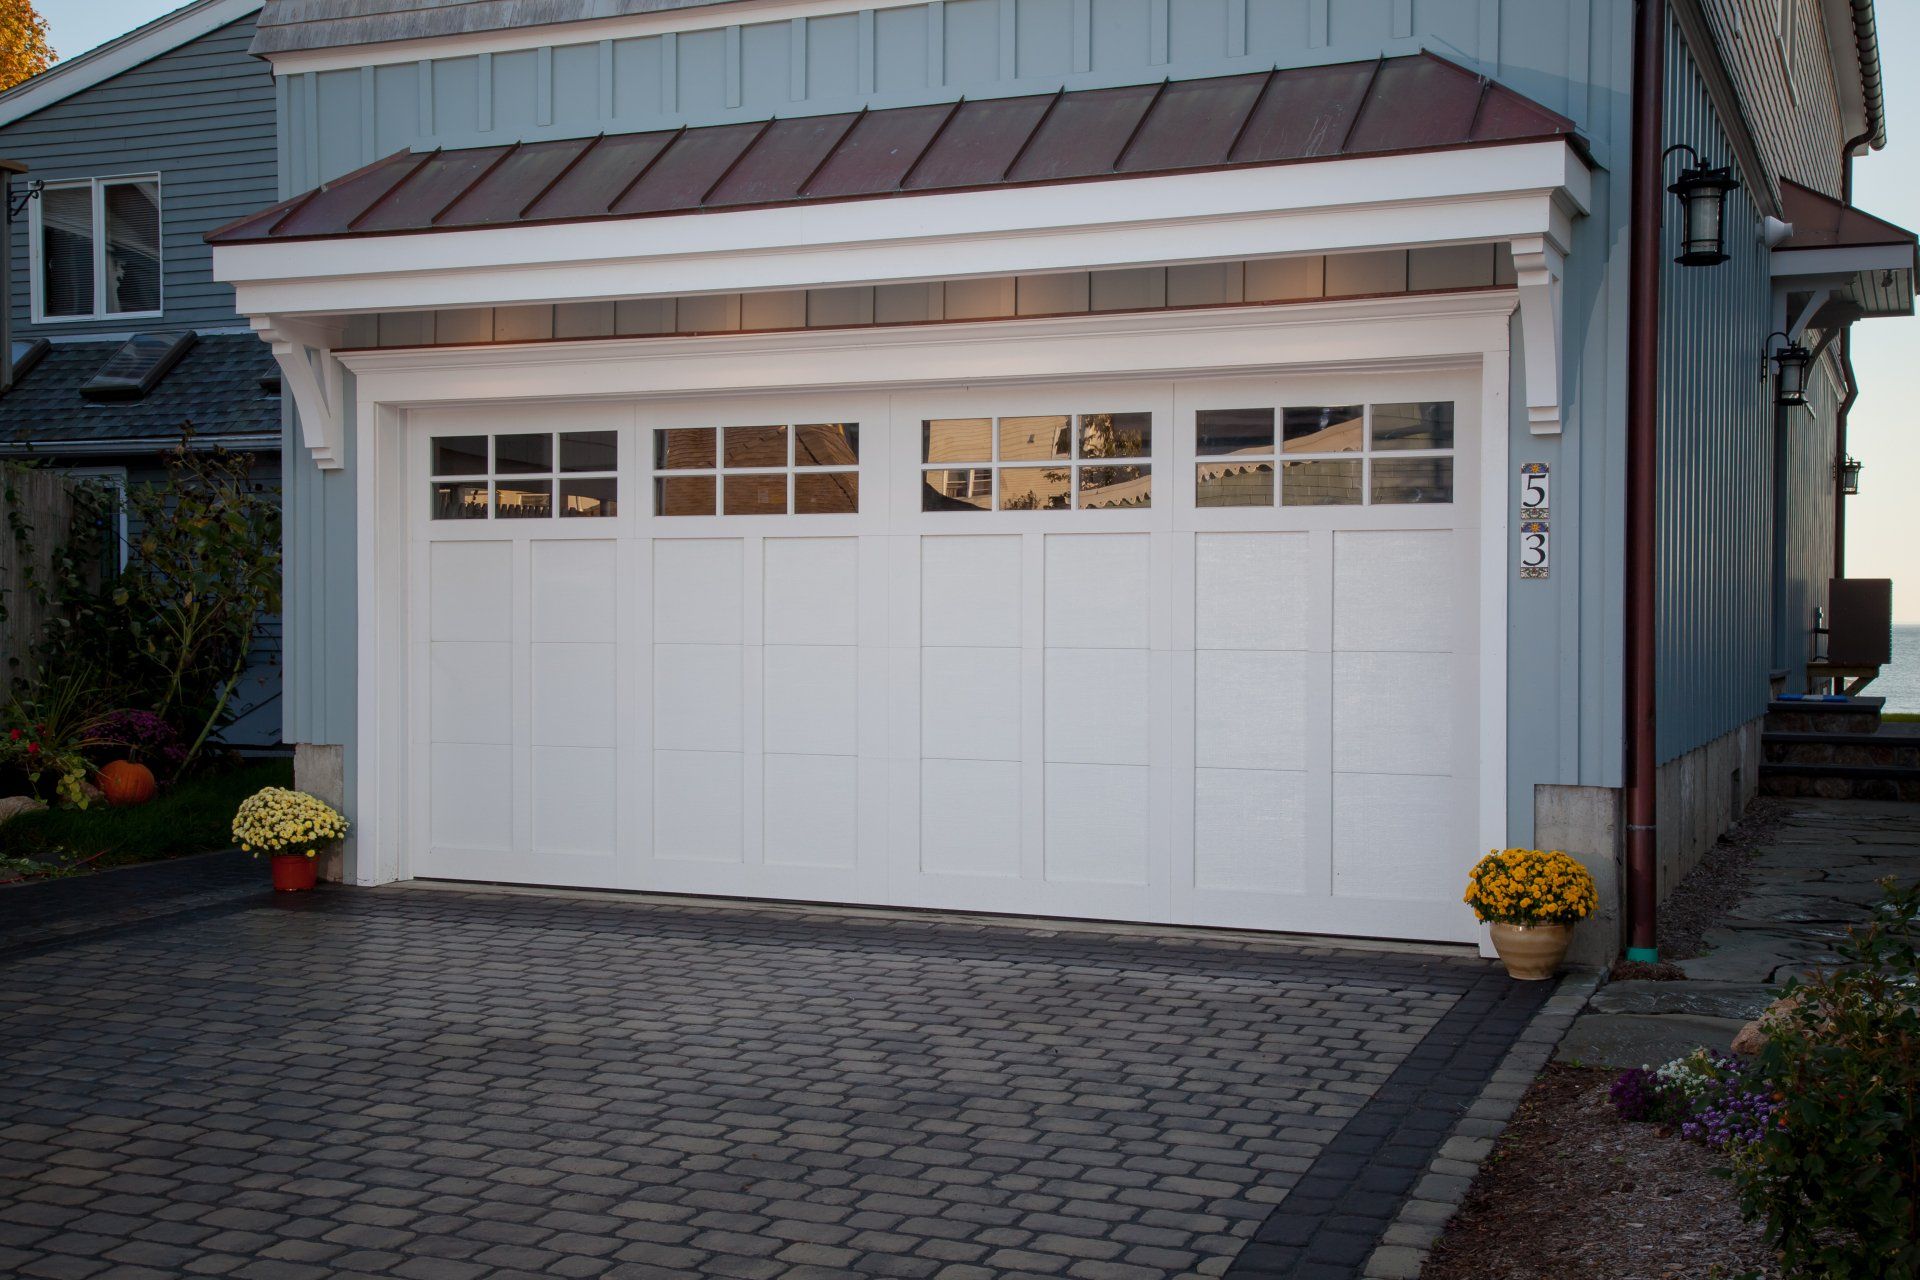 Finished result of our garage door repair service